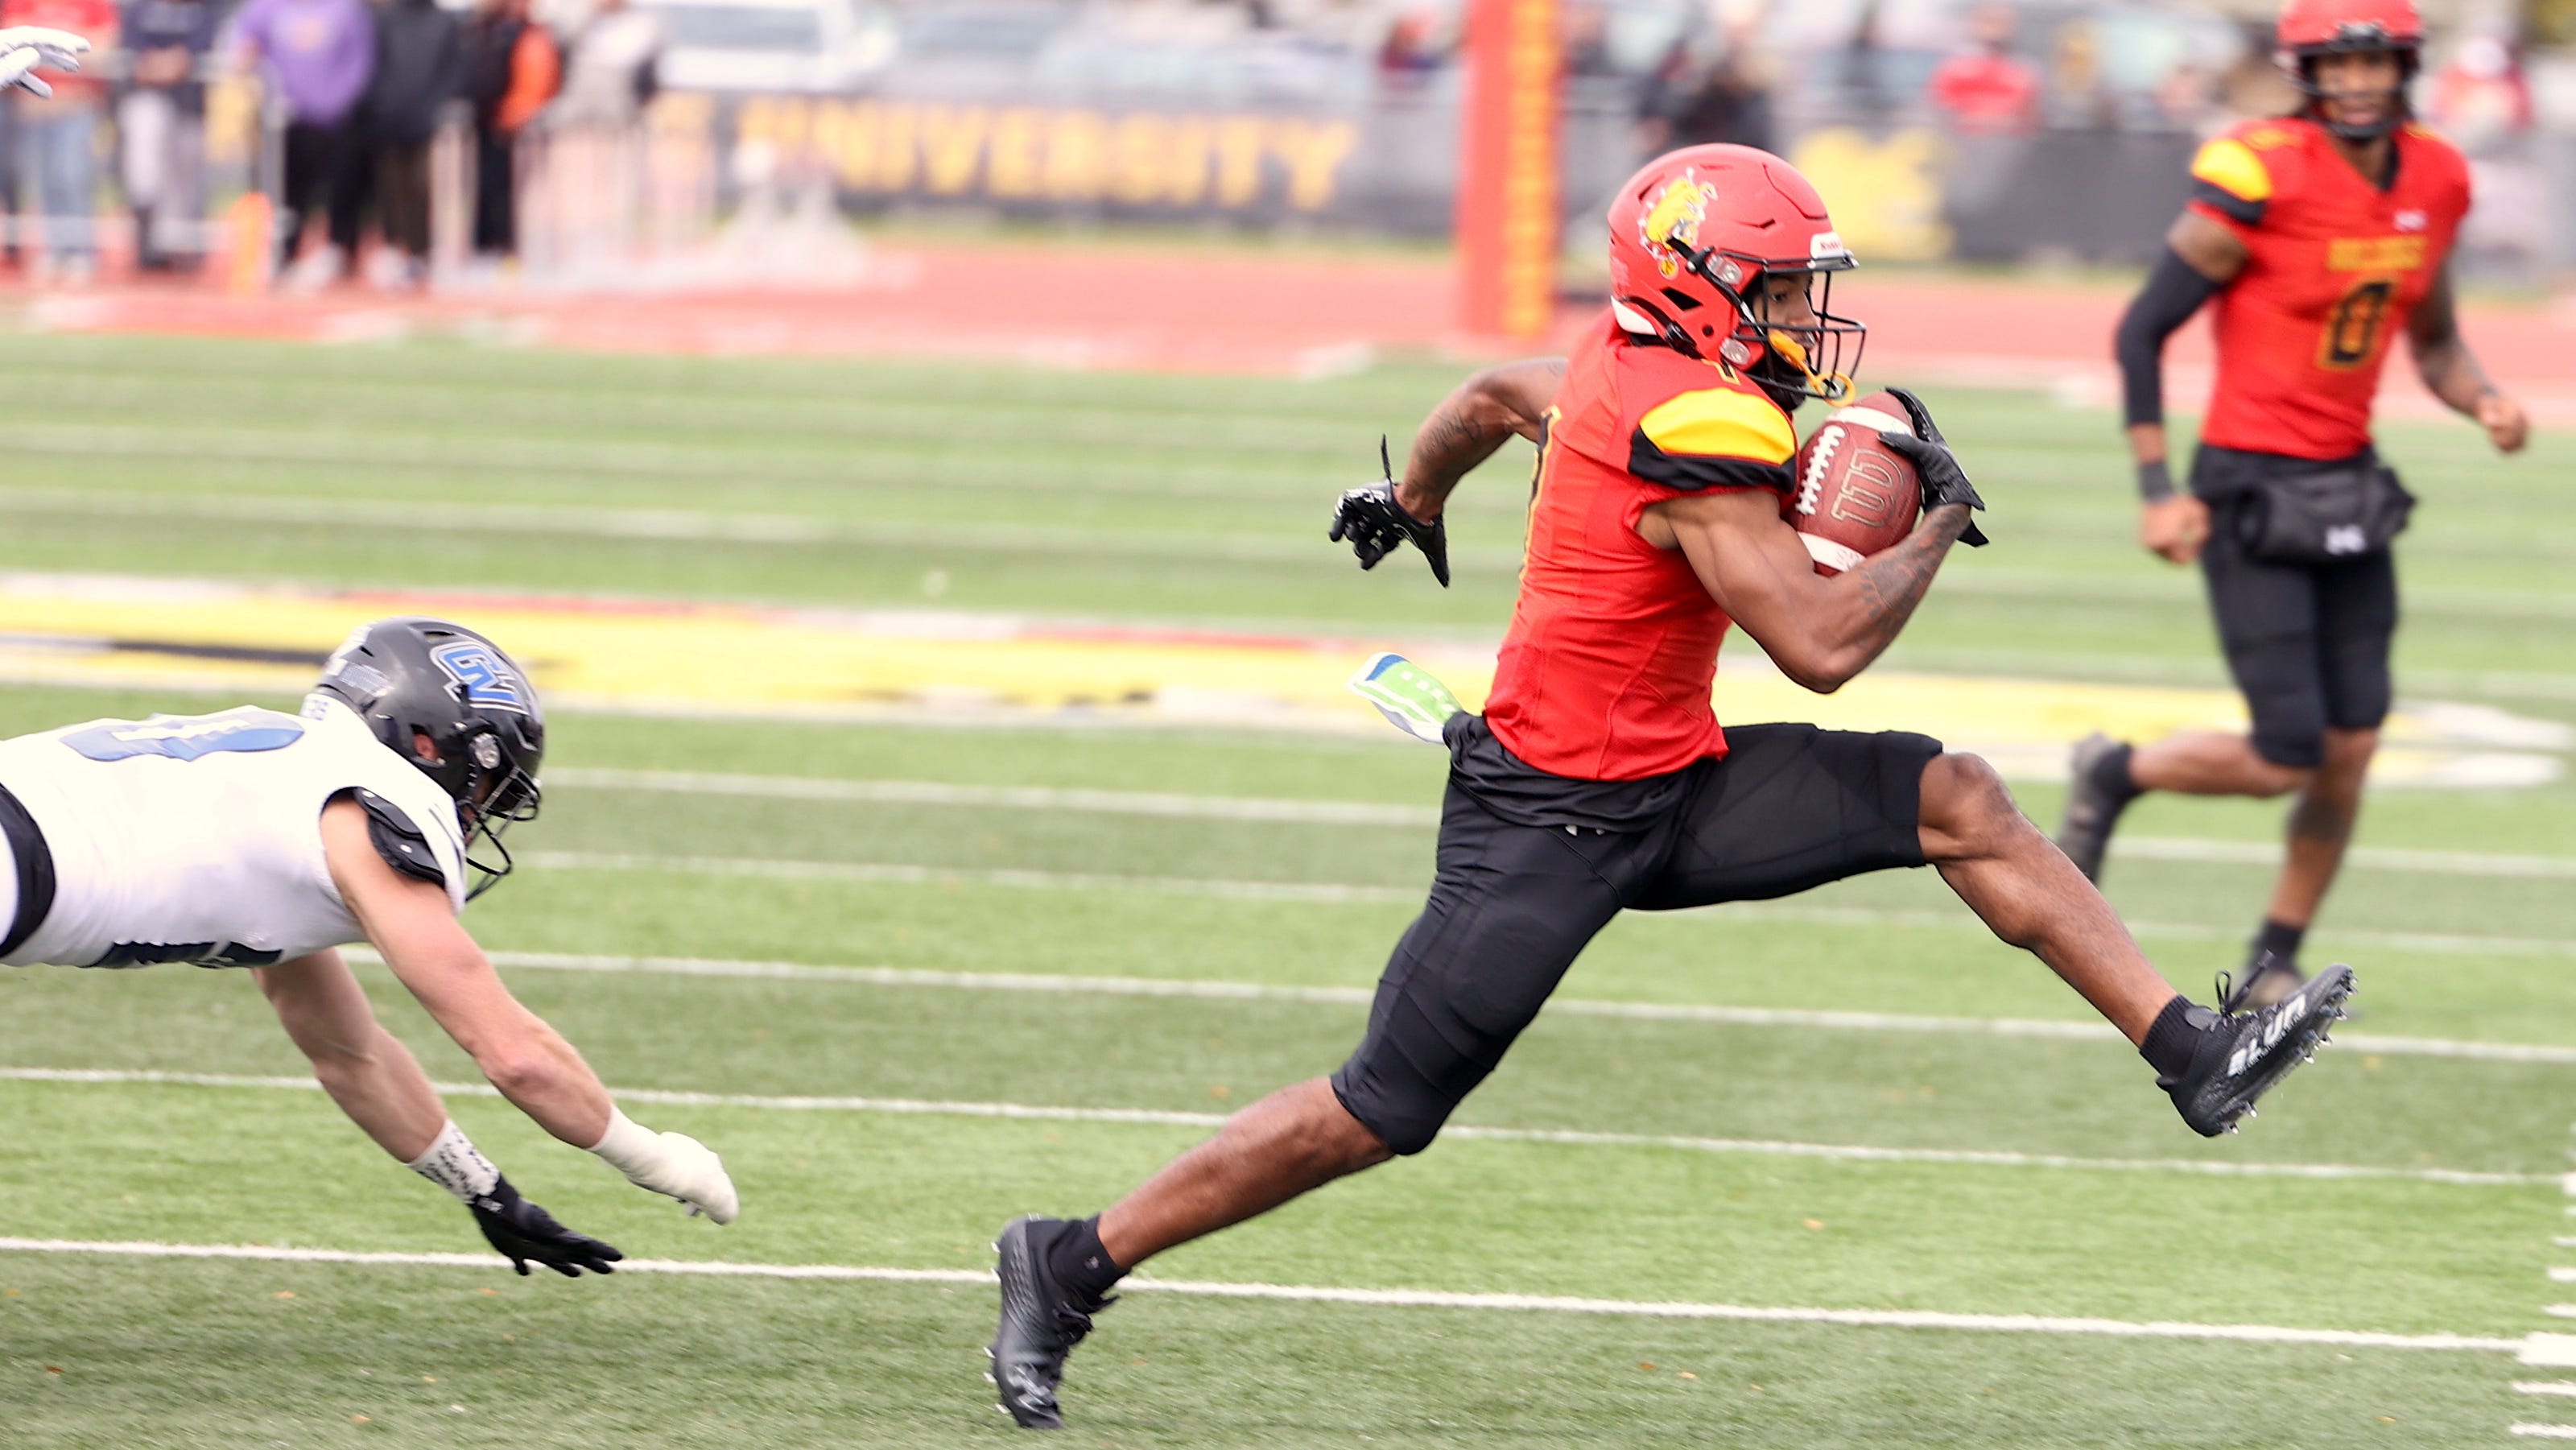 Ferris State football kicks off NCAA DII title defense with 417 rout